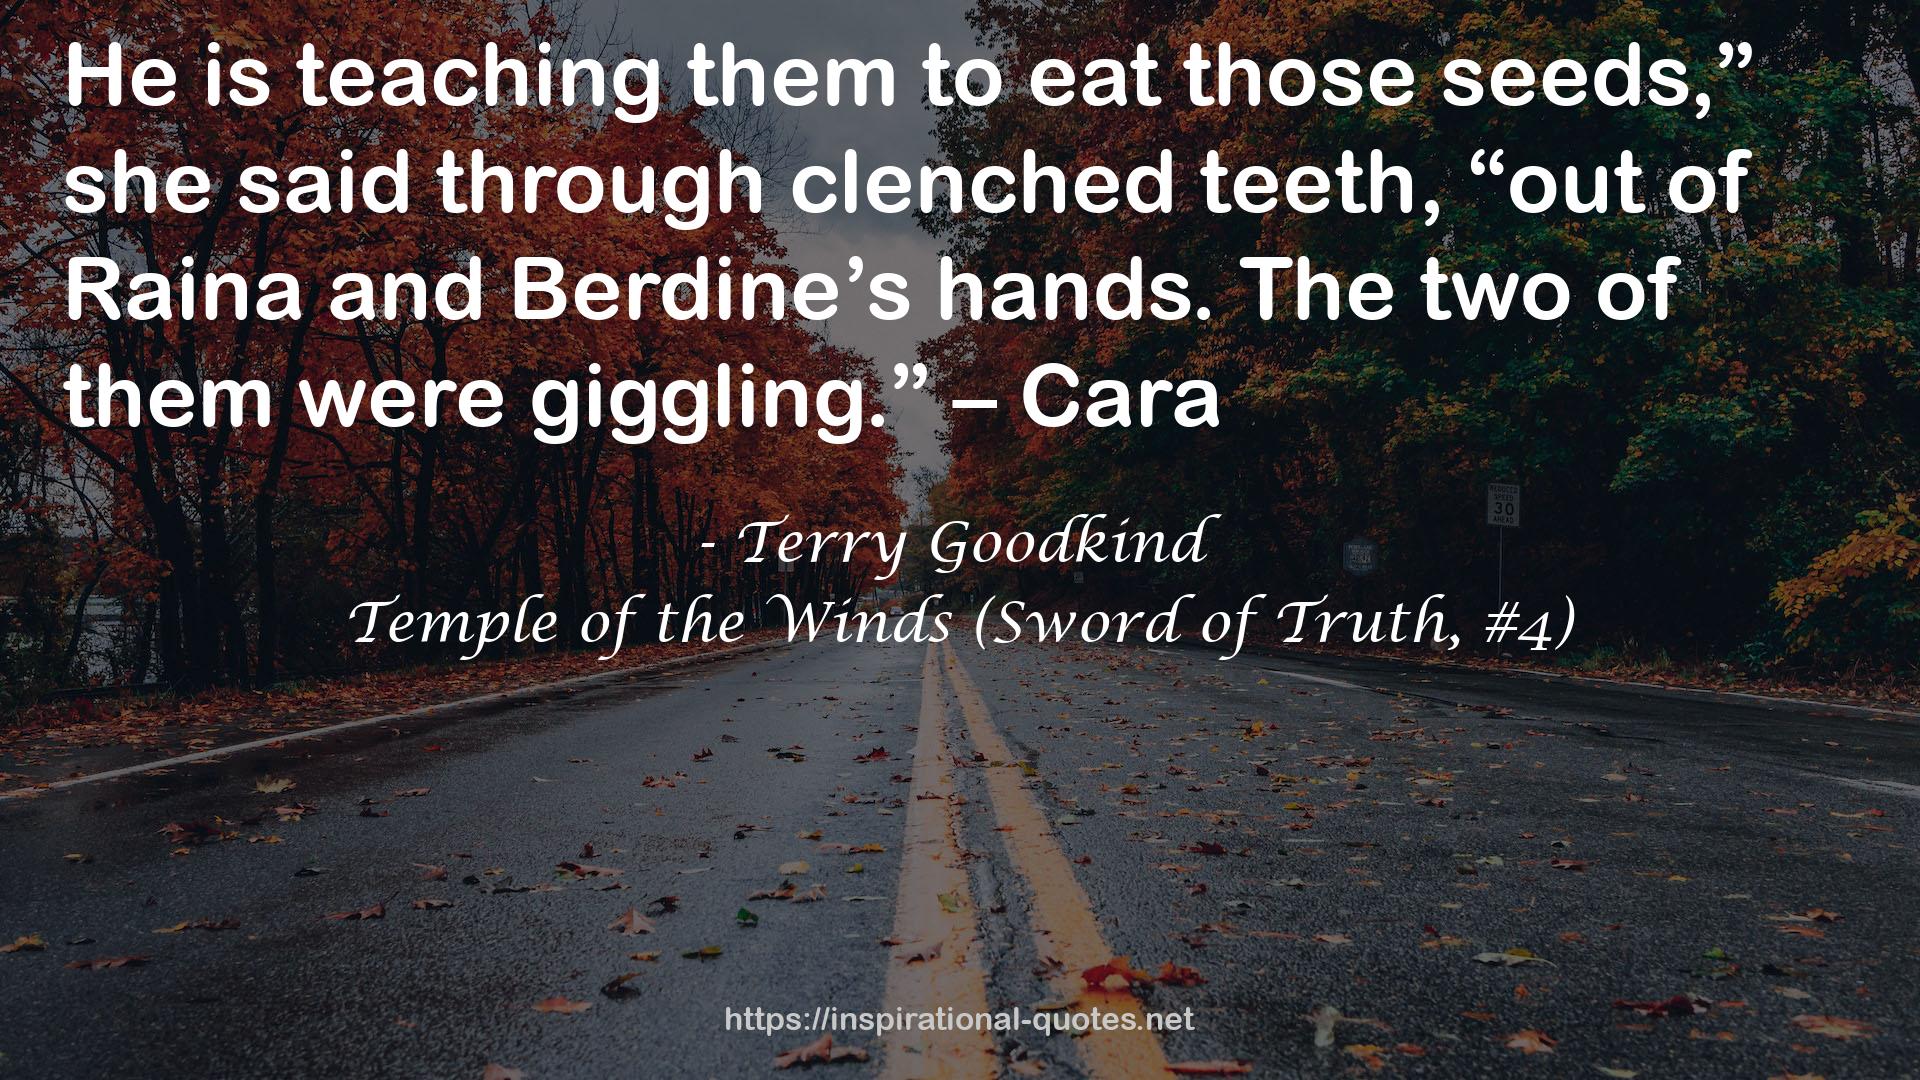 Terry Goodkind QUOTES